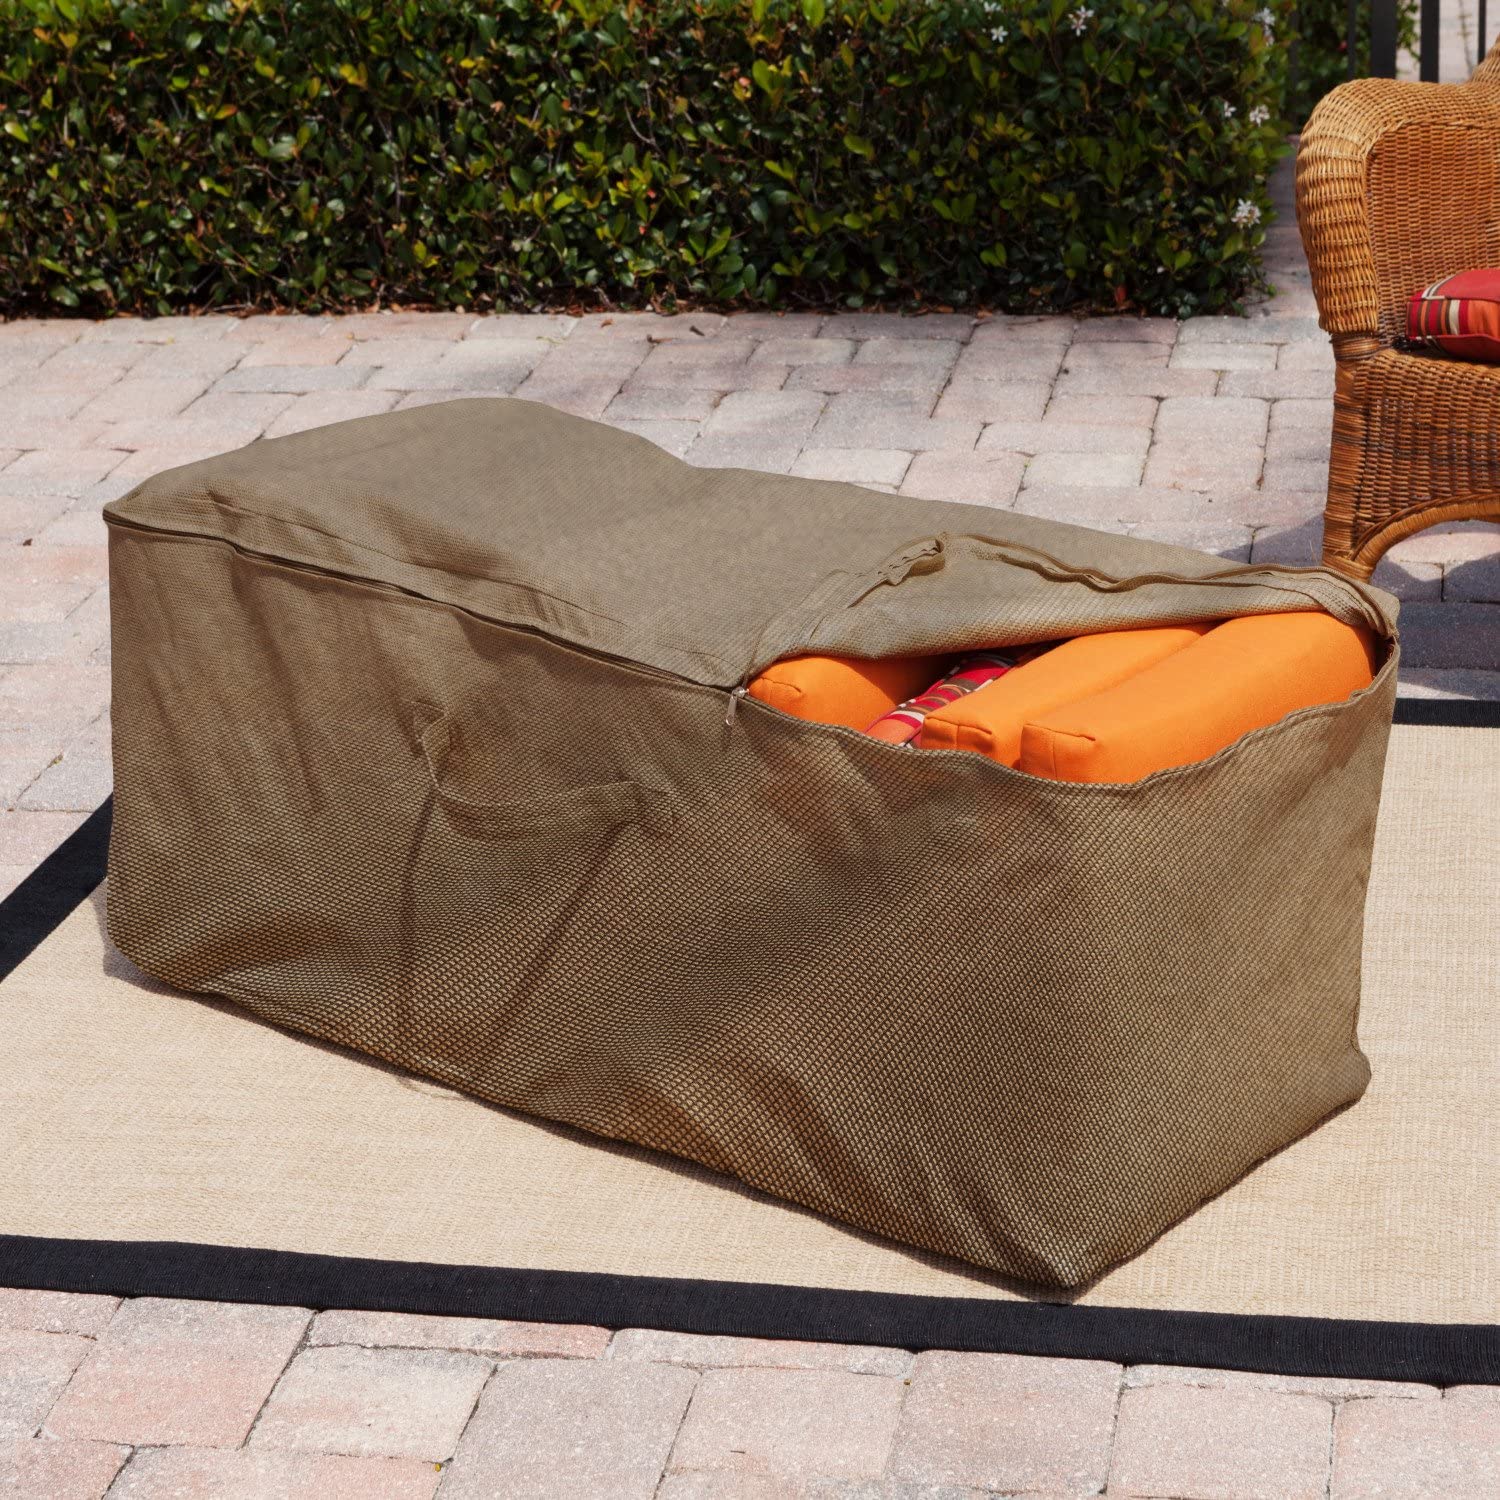 The Brilliant Hack To Keep Your Outdoor Cushions In Place On A